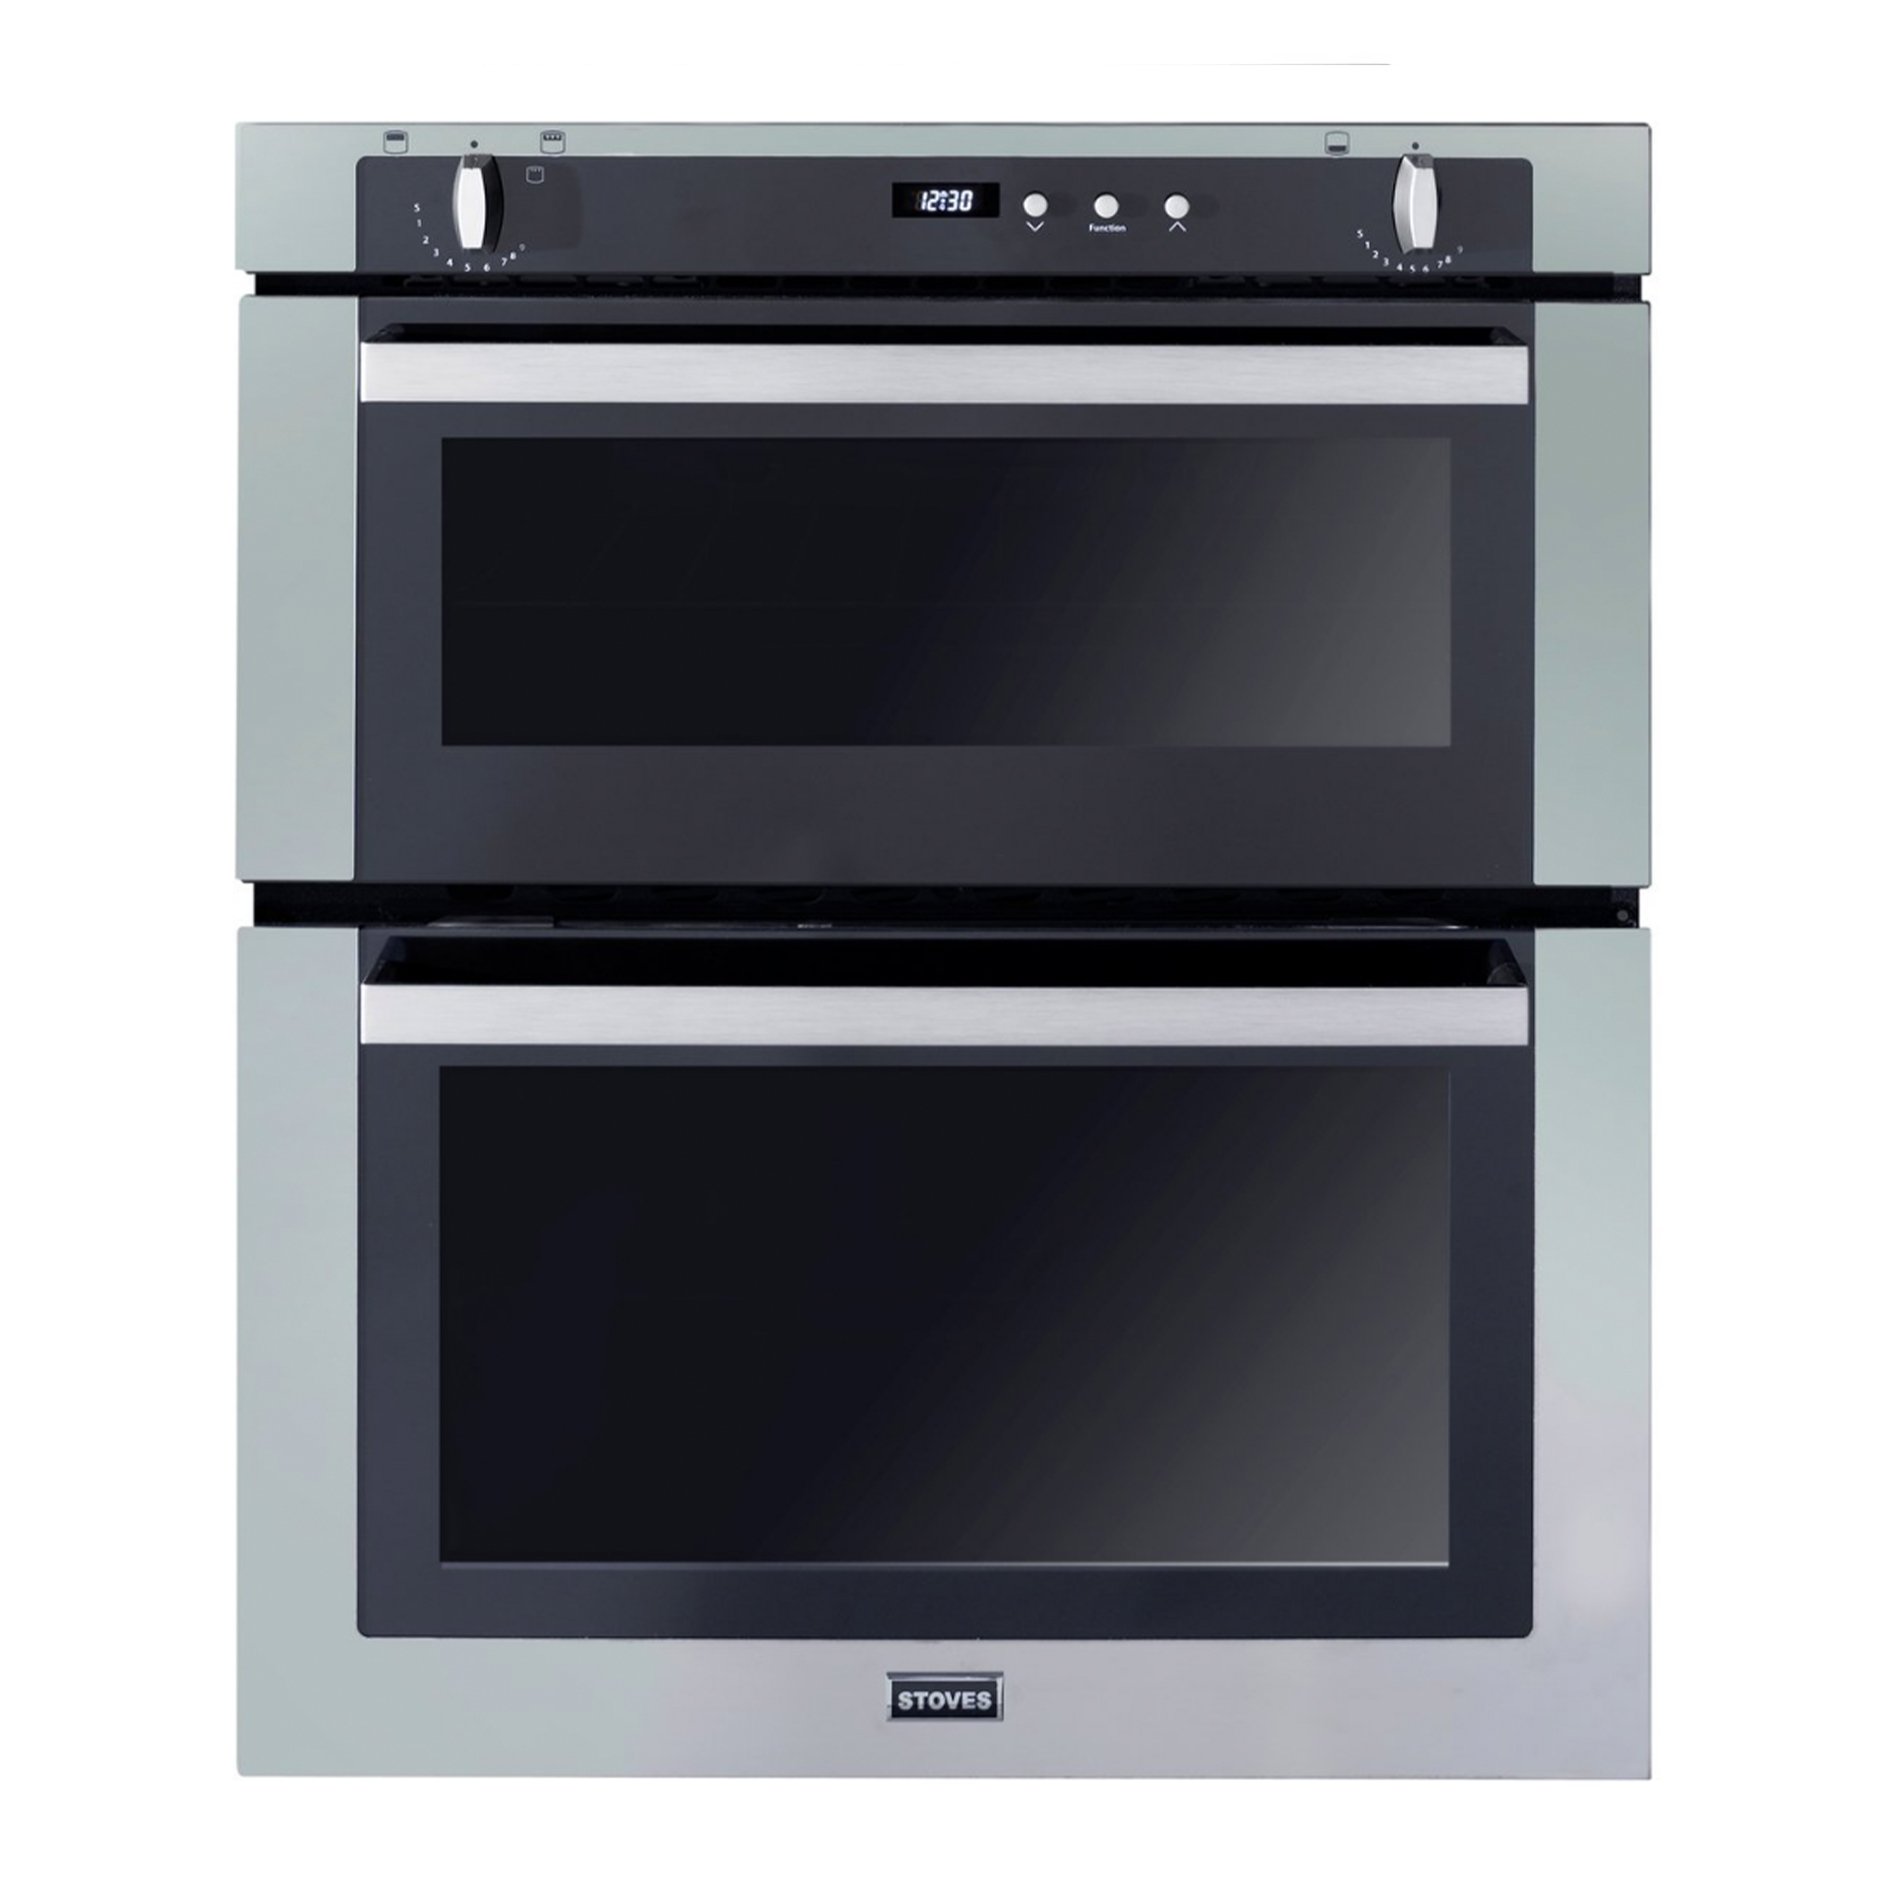 70cm built-under gas double oven. Additional features include cook-to-off timer, telescopic slider shelves & easy clean enamel. A/B energy rating.